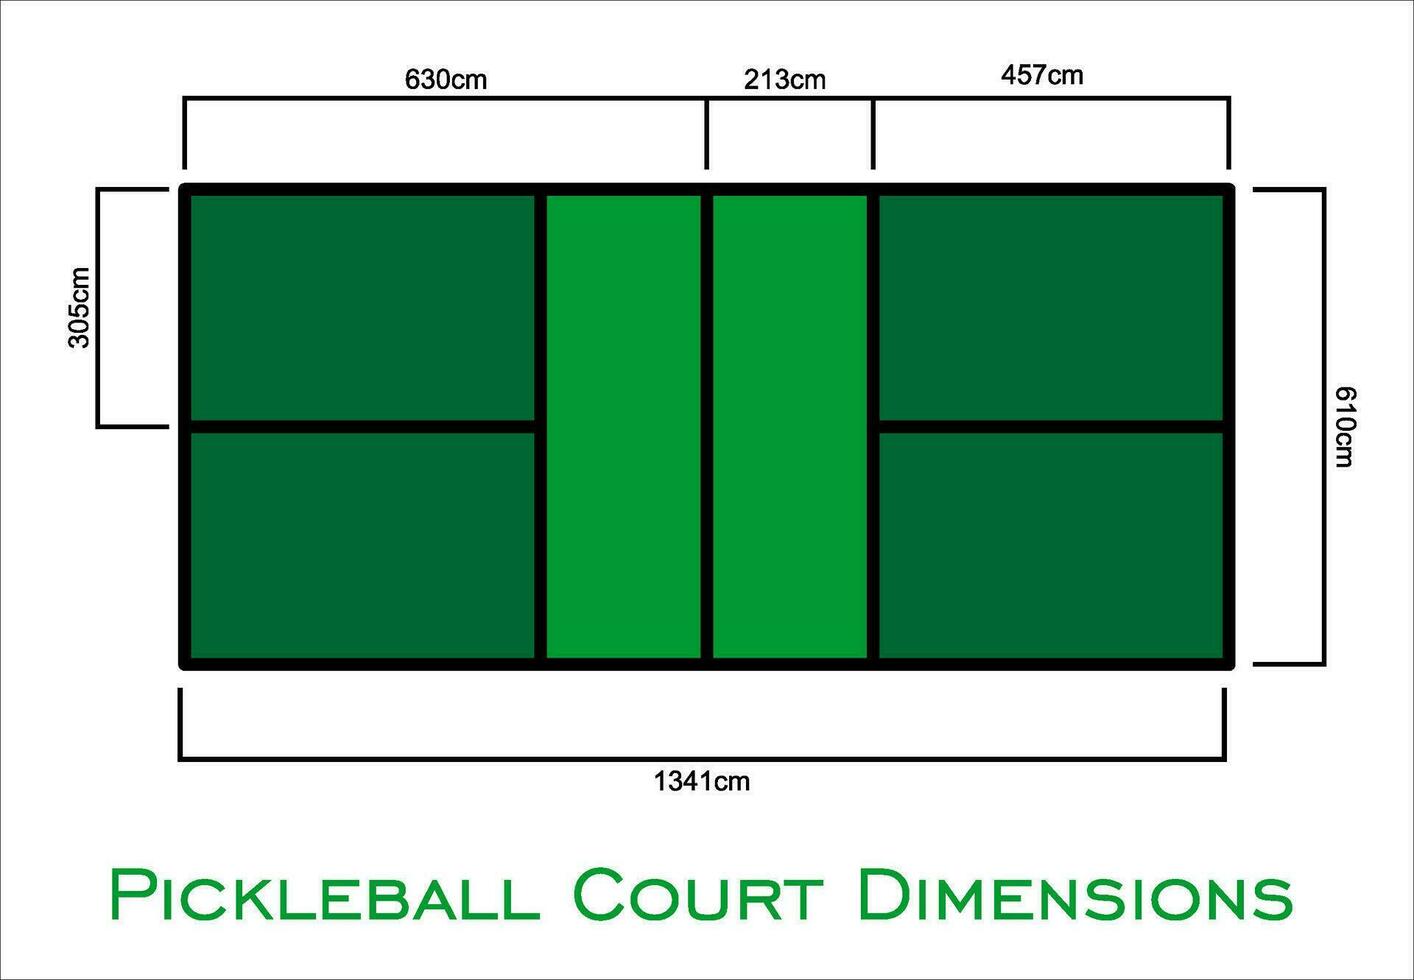 Universal Pickleball Court Dimensions size measurements  in centimeter  top view vector